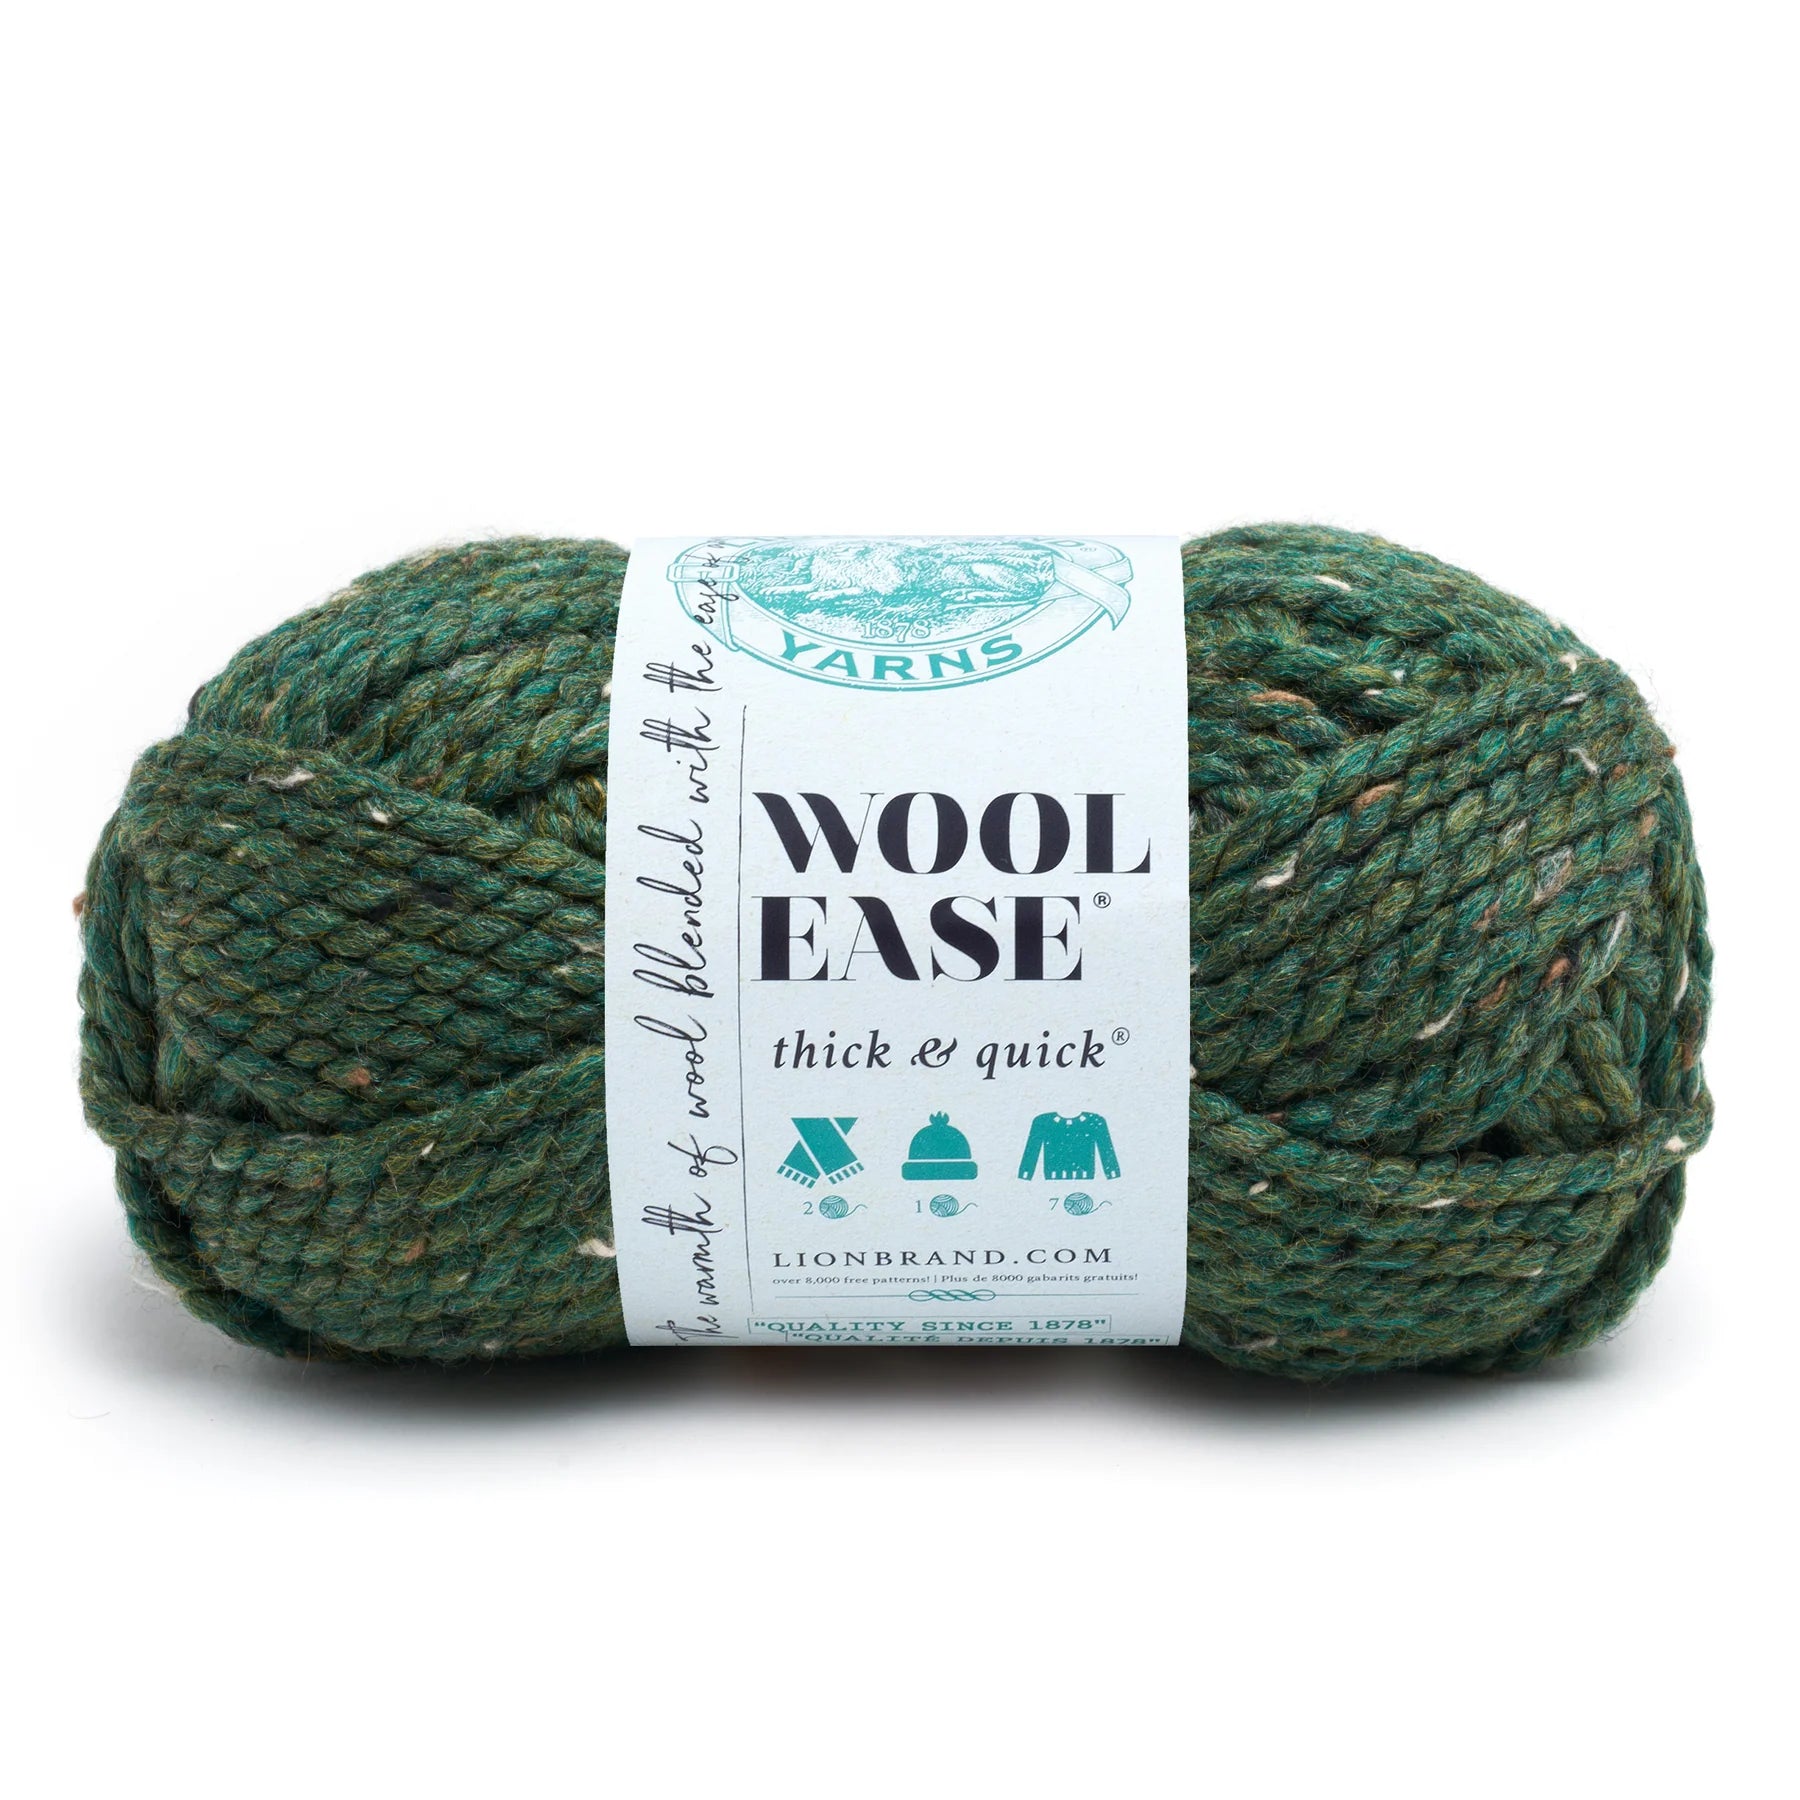 Lion Brand Yarn Wool-Ease Thick & Quick Yarn, Soft and Bulky Yarn for  Knitting, Crocheting, and Crafting, 1 Skein, Toasted Almond